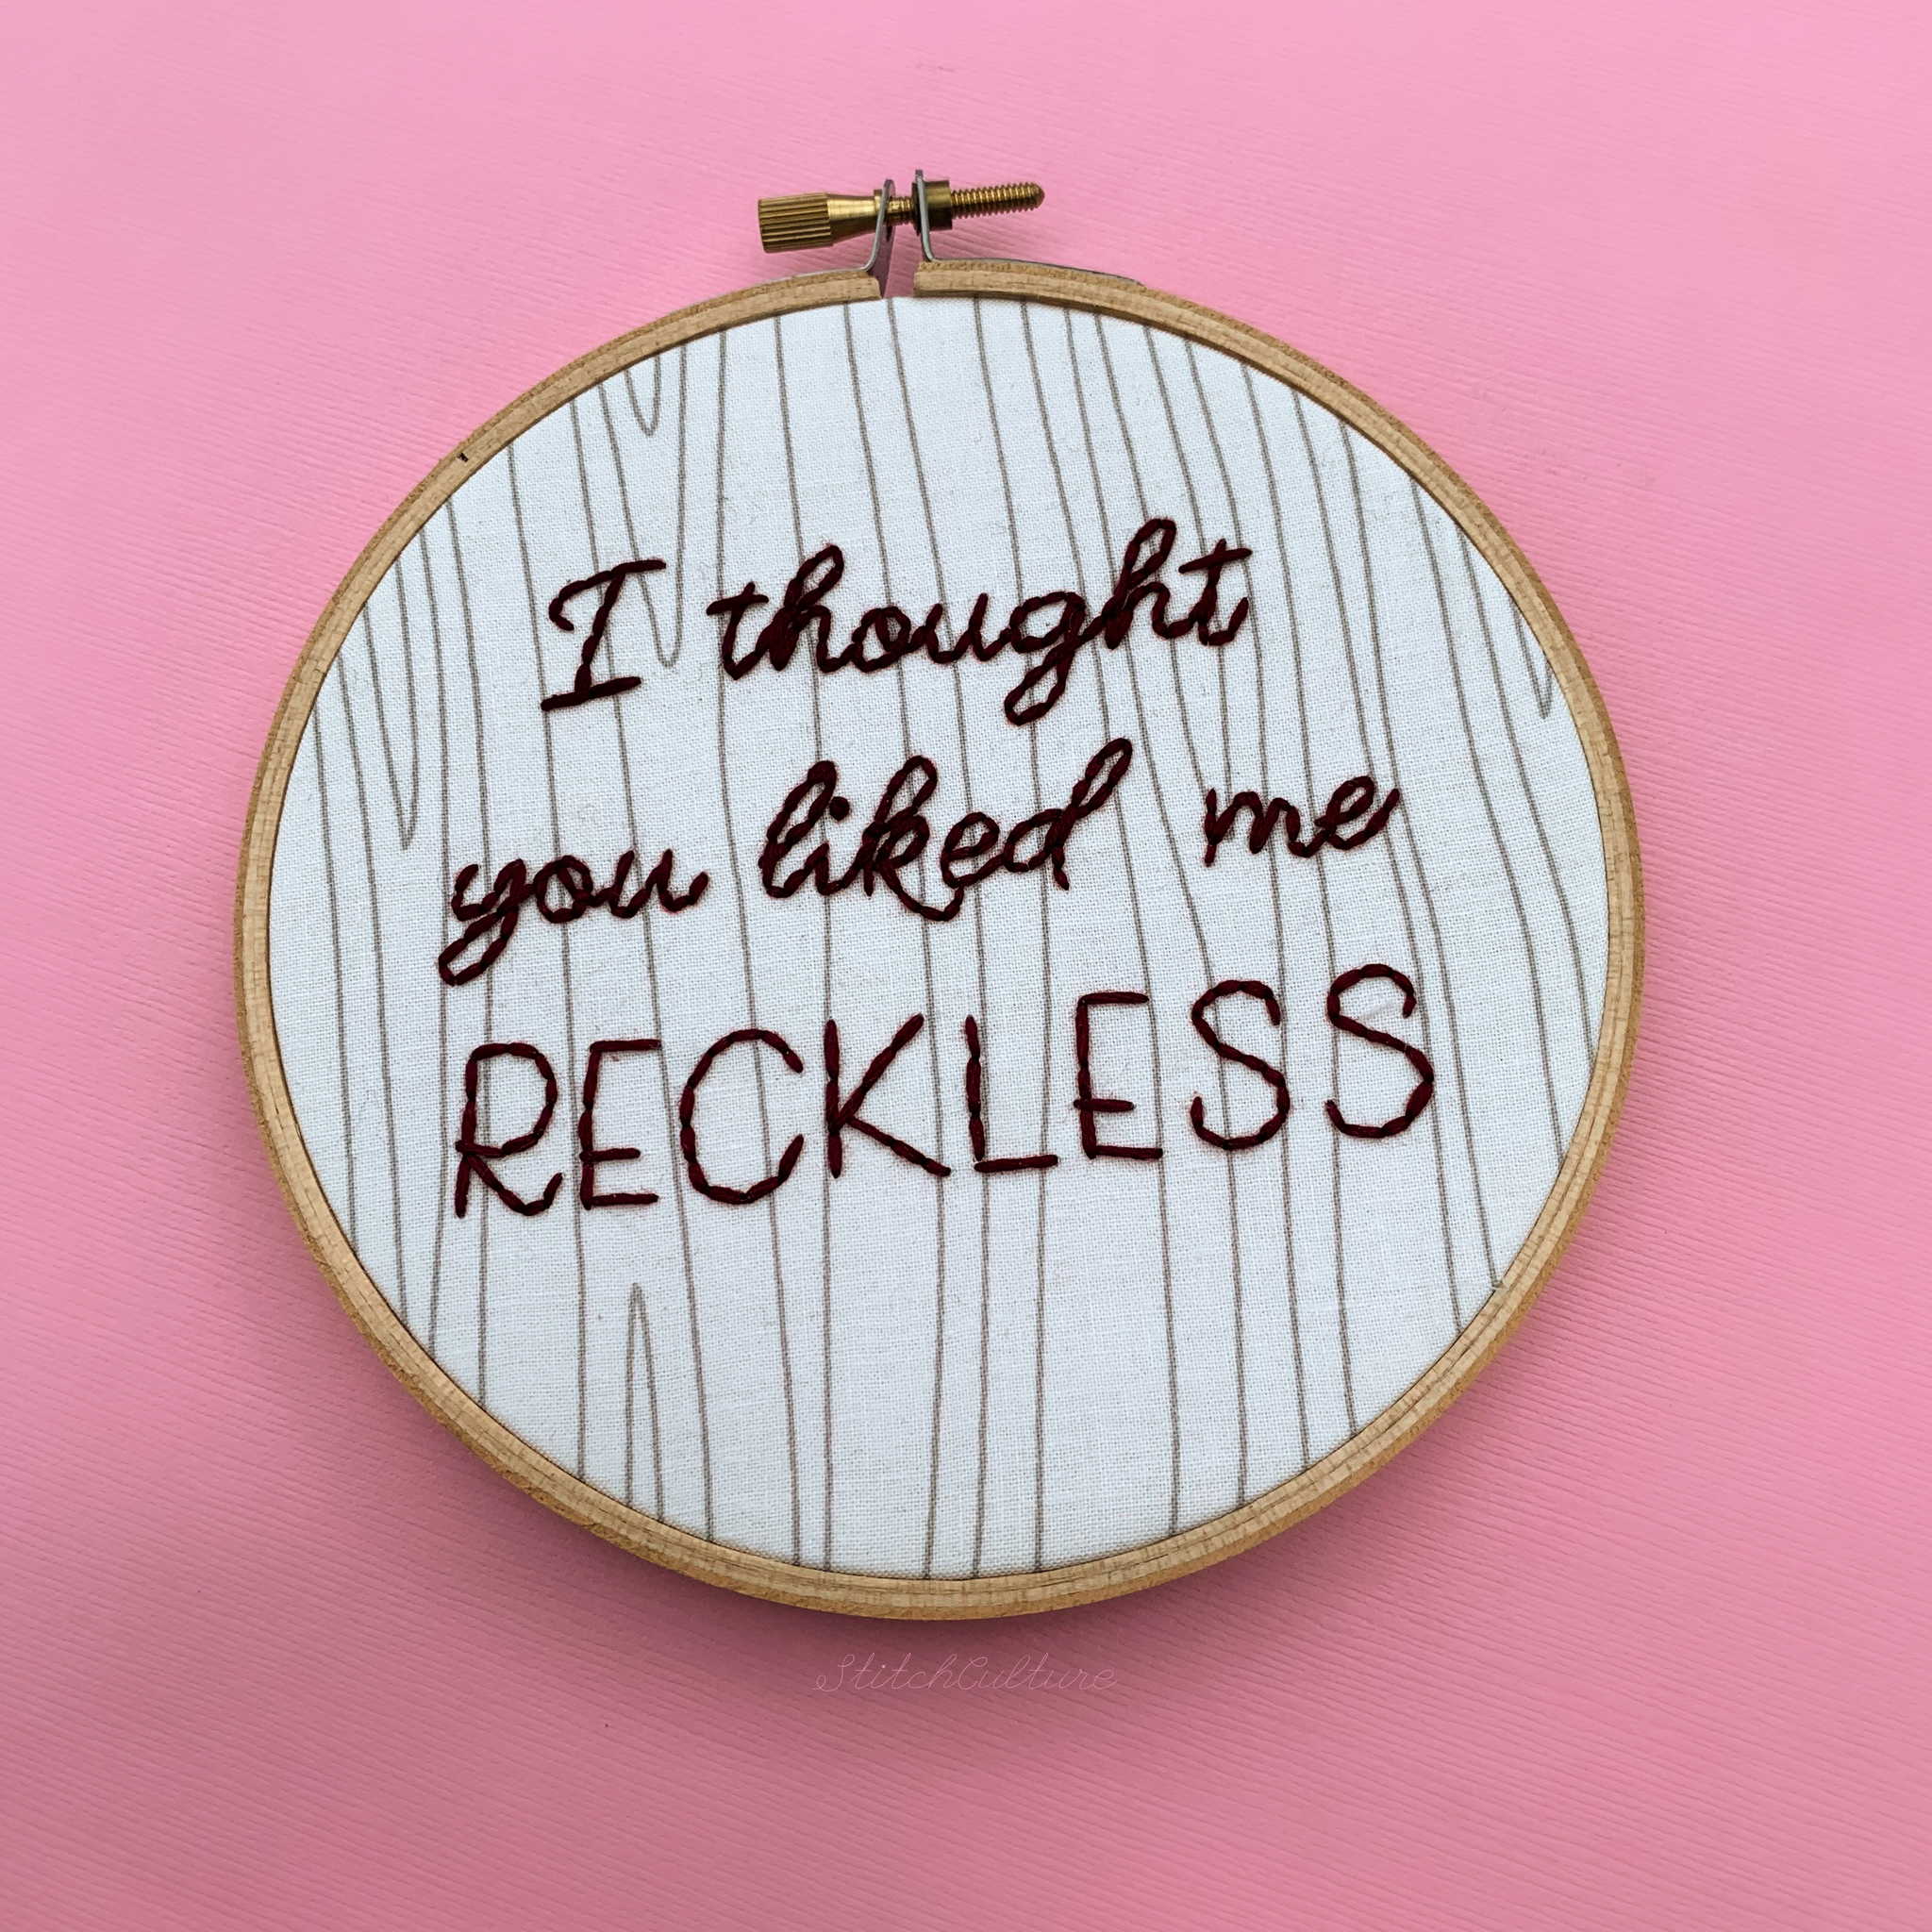 I THOUGHT YOU LIKED ME RECKLESS / Riverdale embroidery hoop